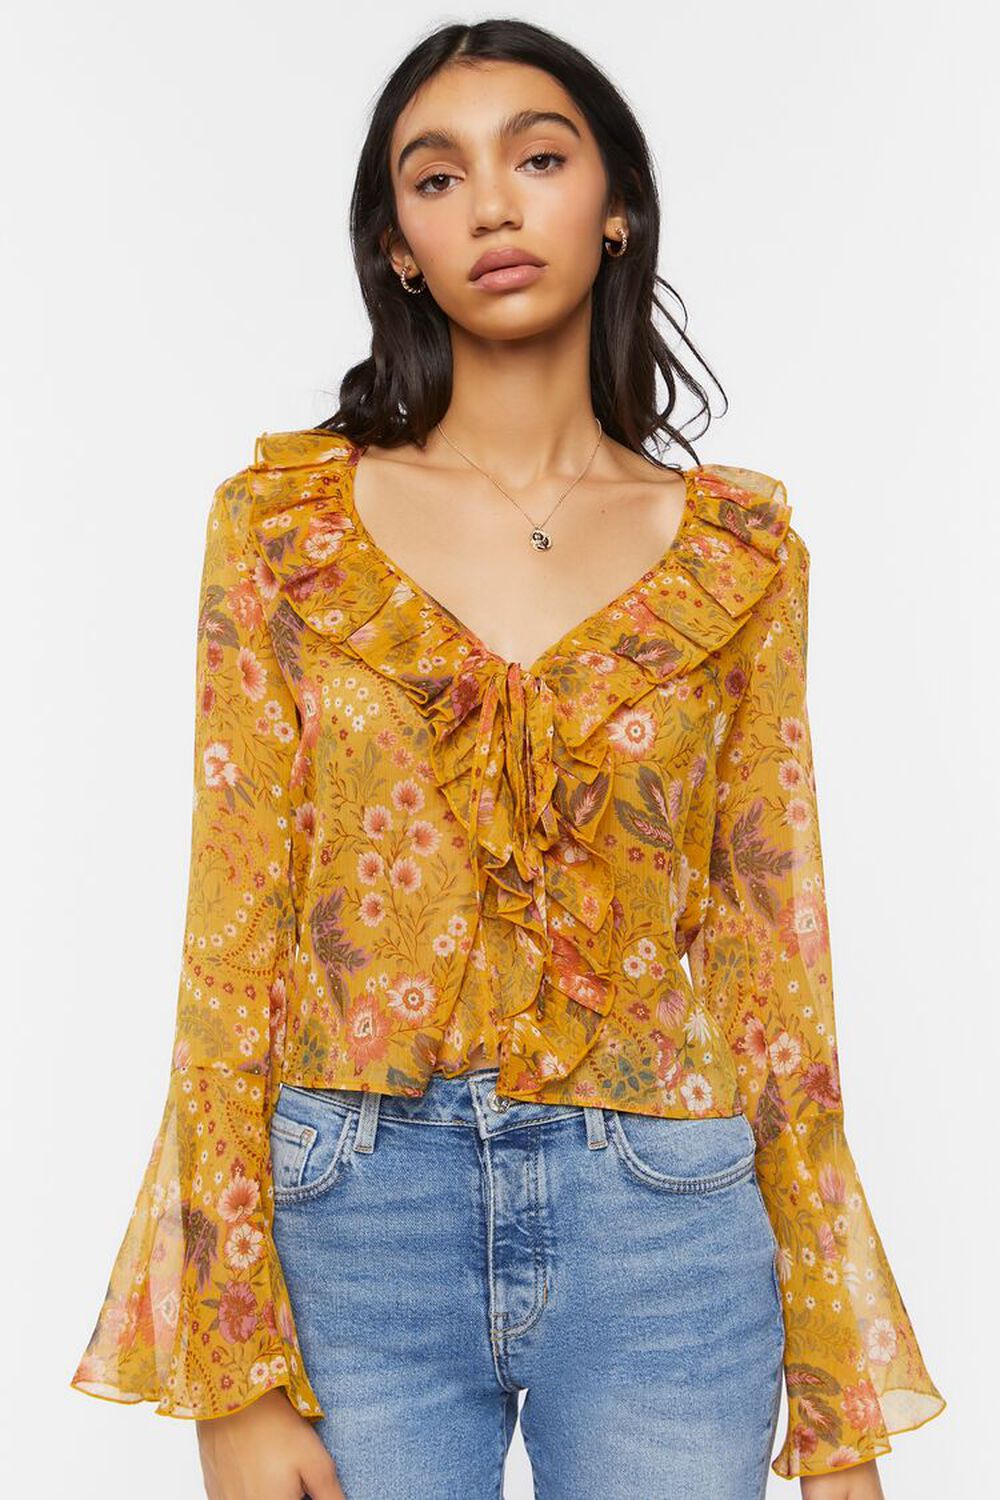 GOLD/MULTI Floral Print Ruffled Flounce Top, image 1